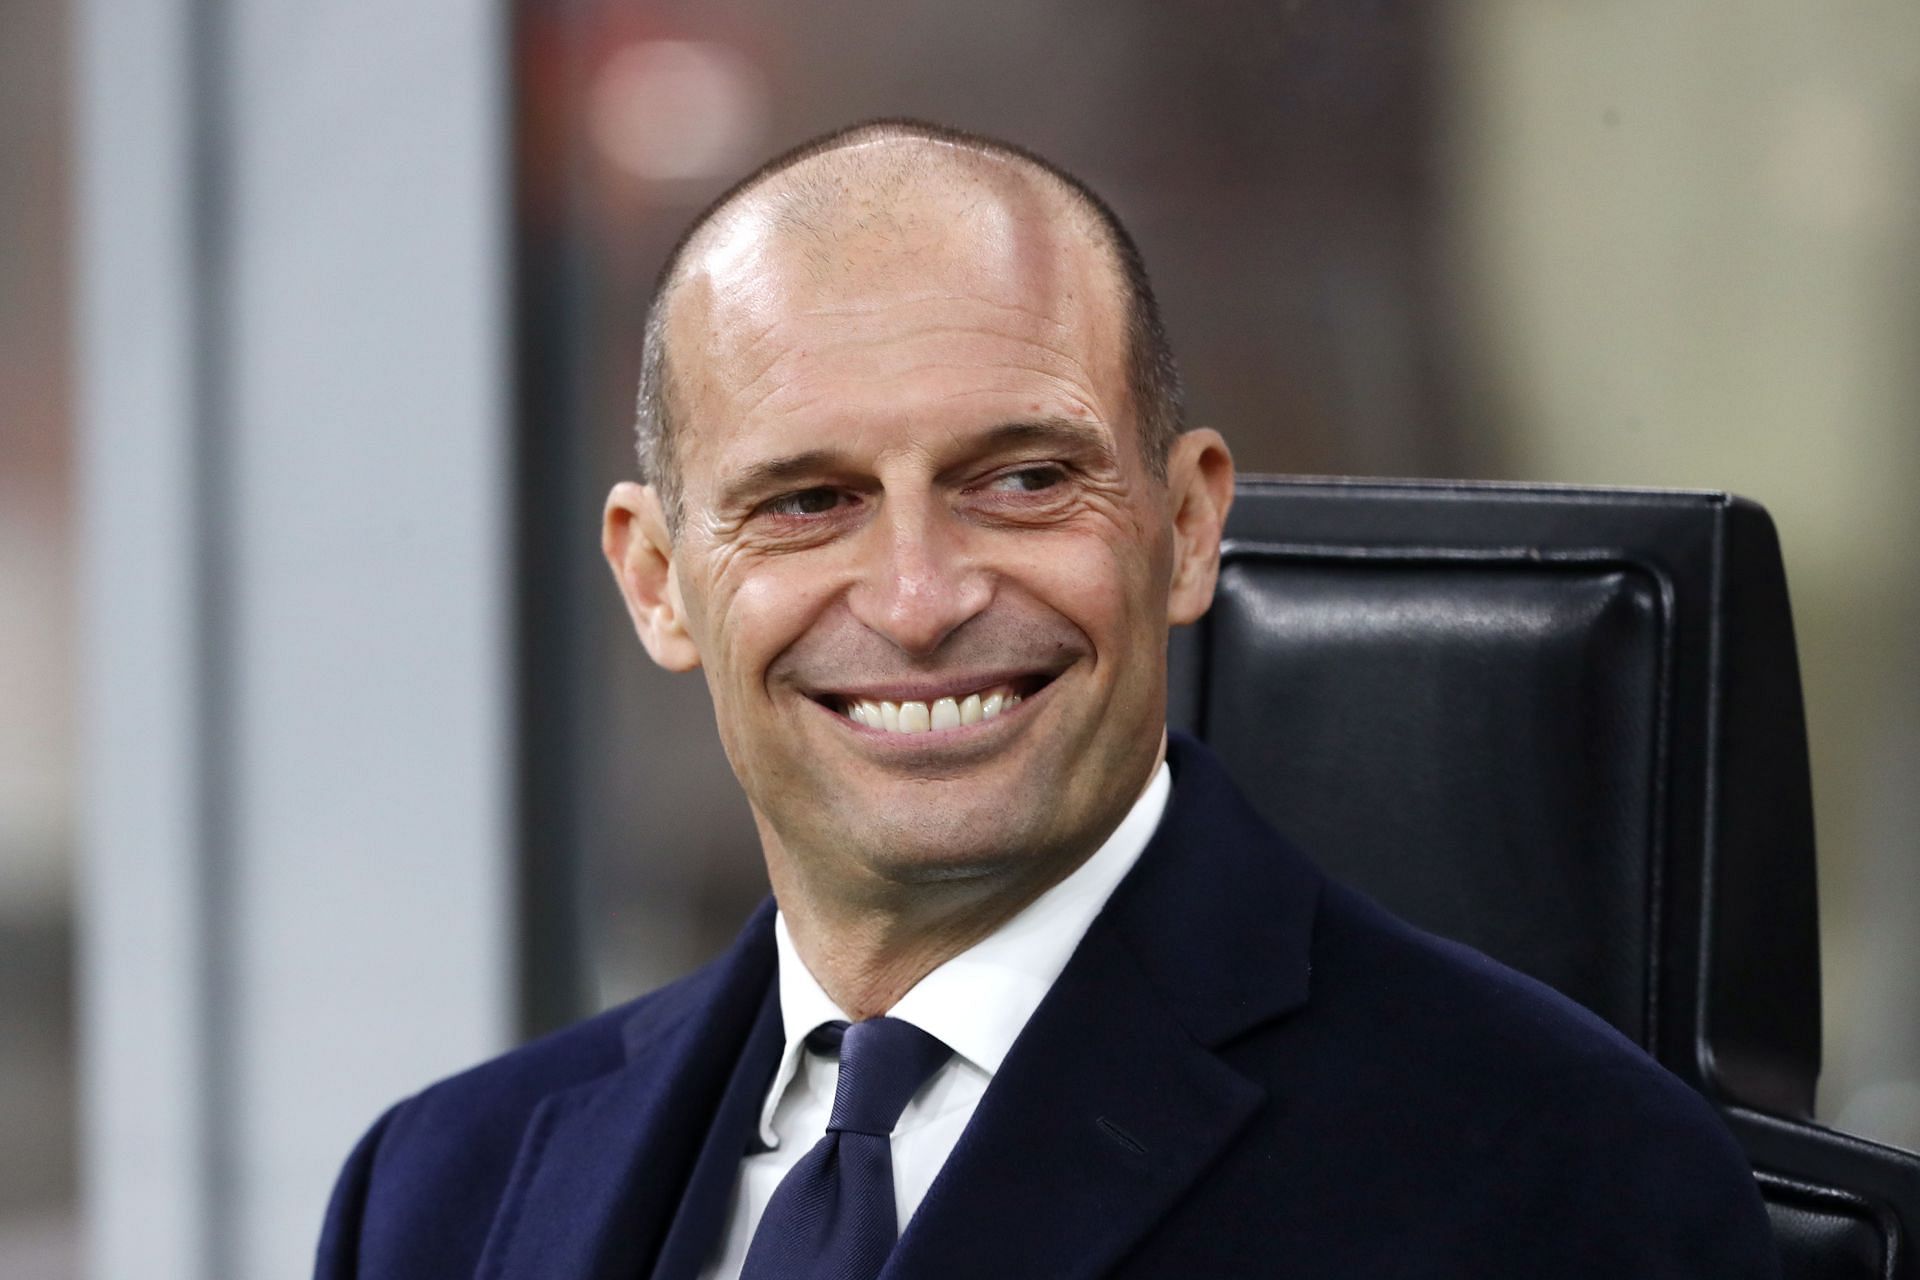 Massimiliano Allegri during the AC Milan vs Juventus game in Serie A